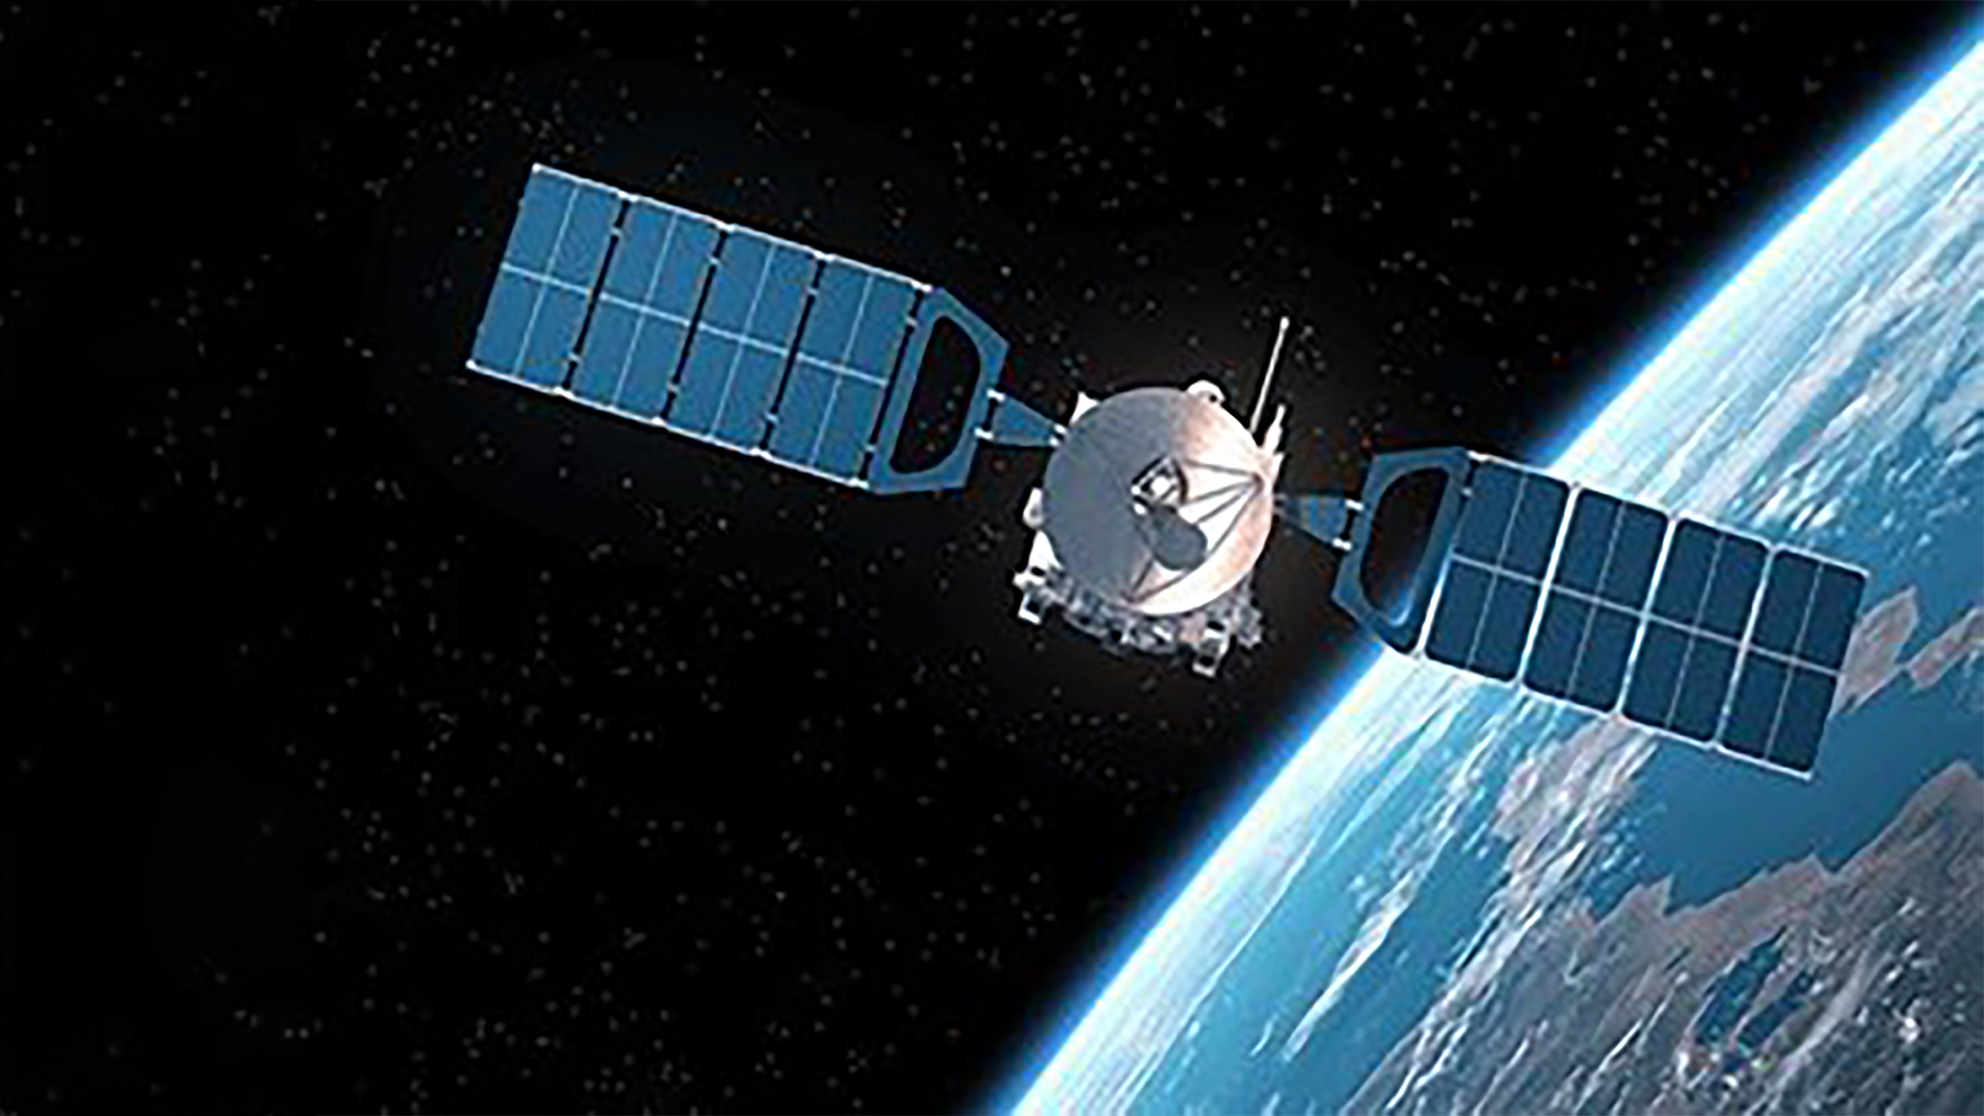 A graphic showing a satellite floating in space in Earth's orbit